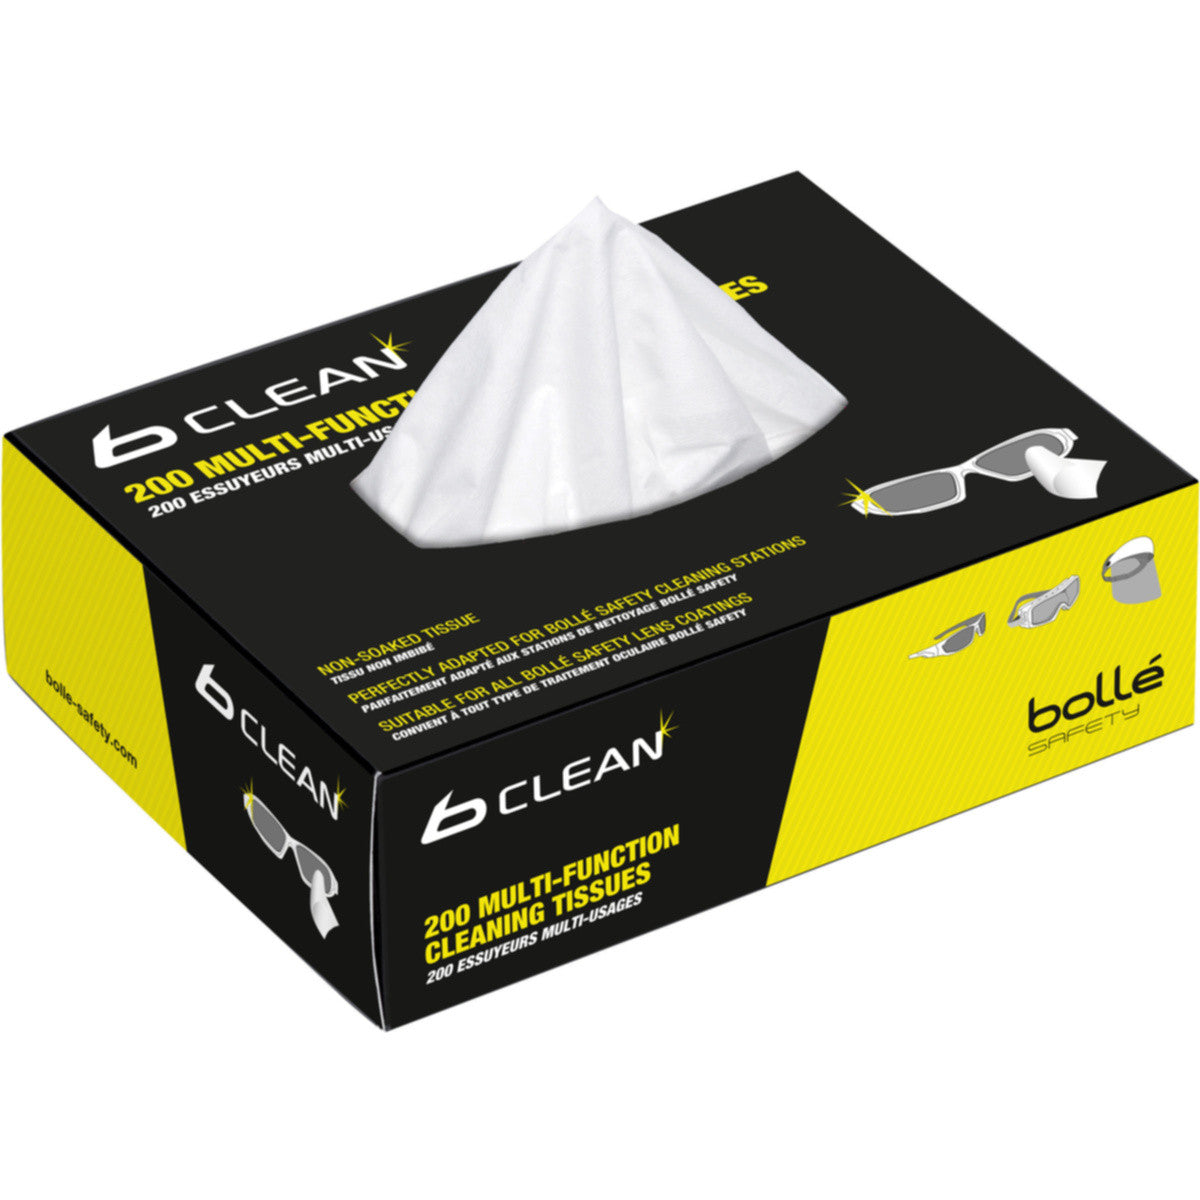 Bollé Safety 200 Multi Function Dry Cleaning Tissues